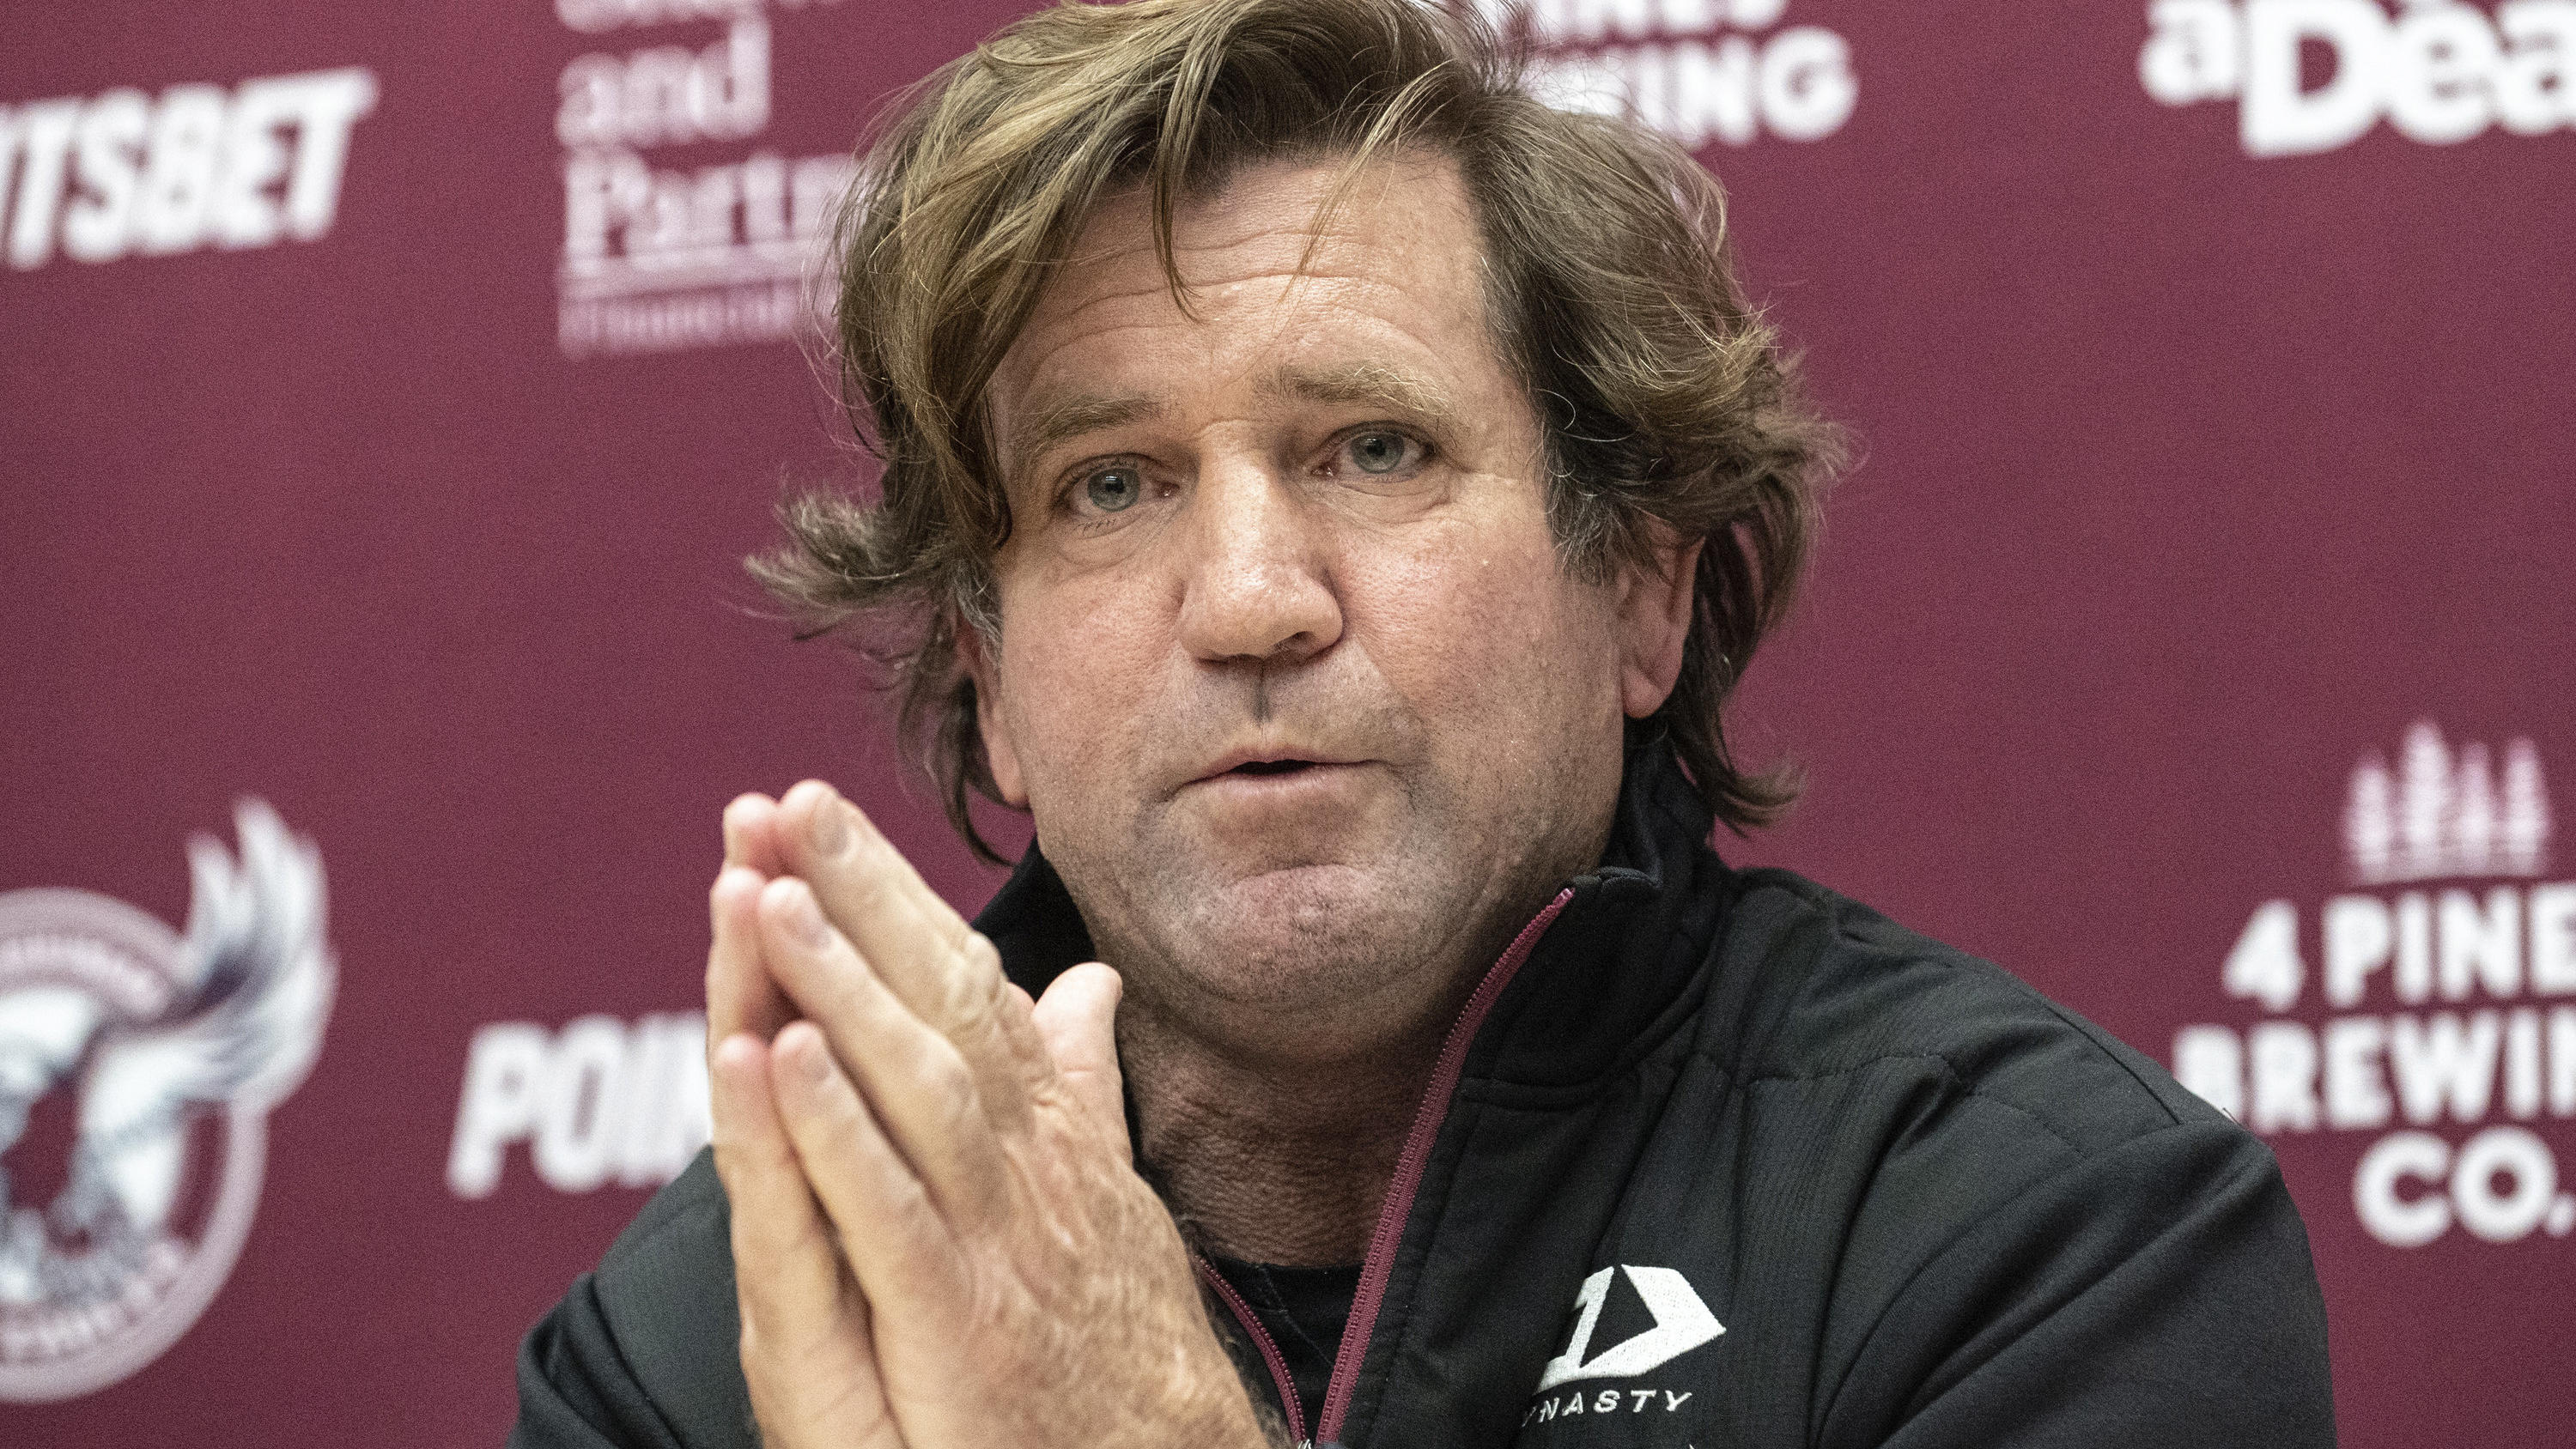 Des Hasler, coach of the Manly Sea Eagles in Australia's National Rugby League, speaks to media in Sydney, Tuesday, July 26, 2022. Seven Sea Eagles players have withdrawn from a match because they're unwilling to wear their club's LGBTQ inclusion jer